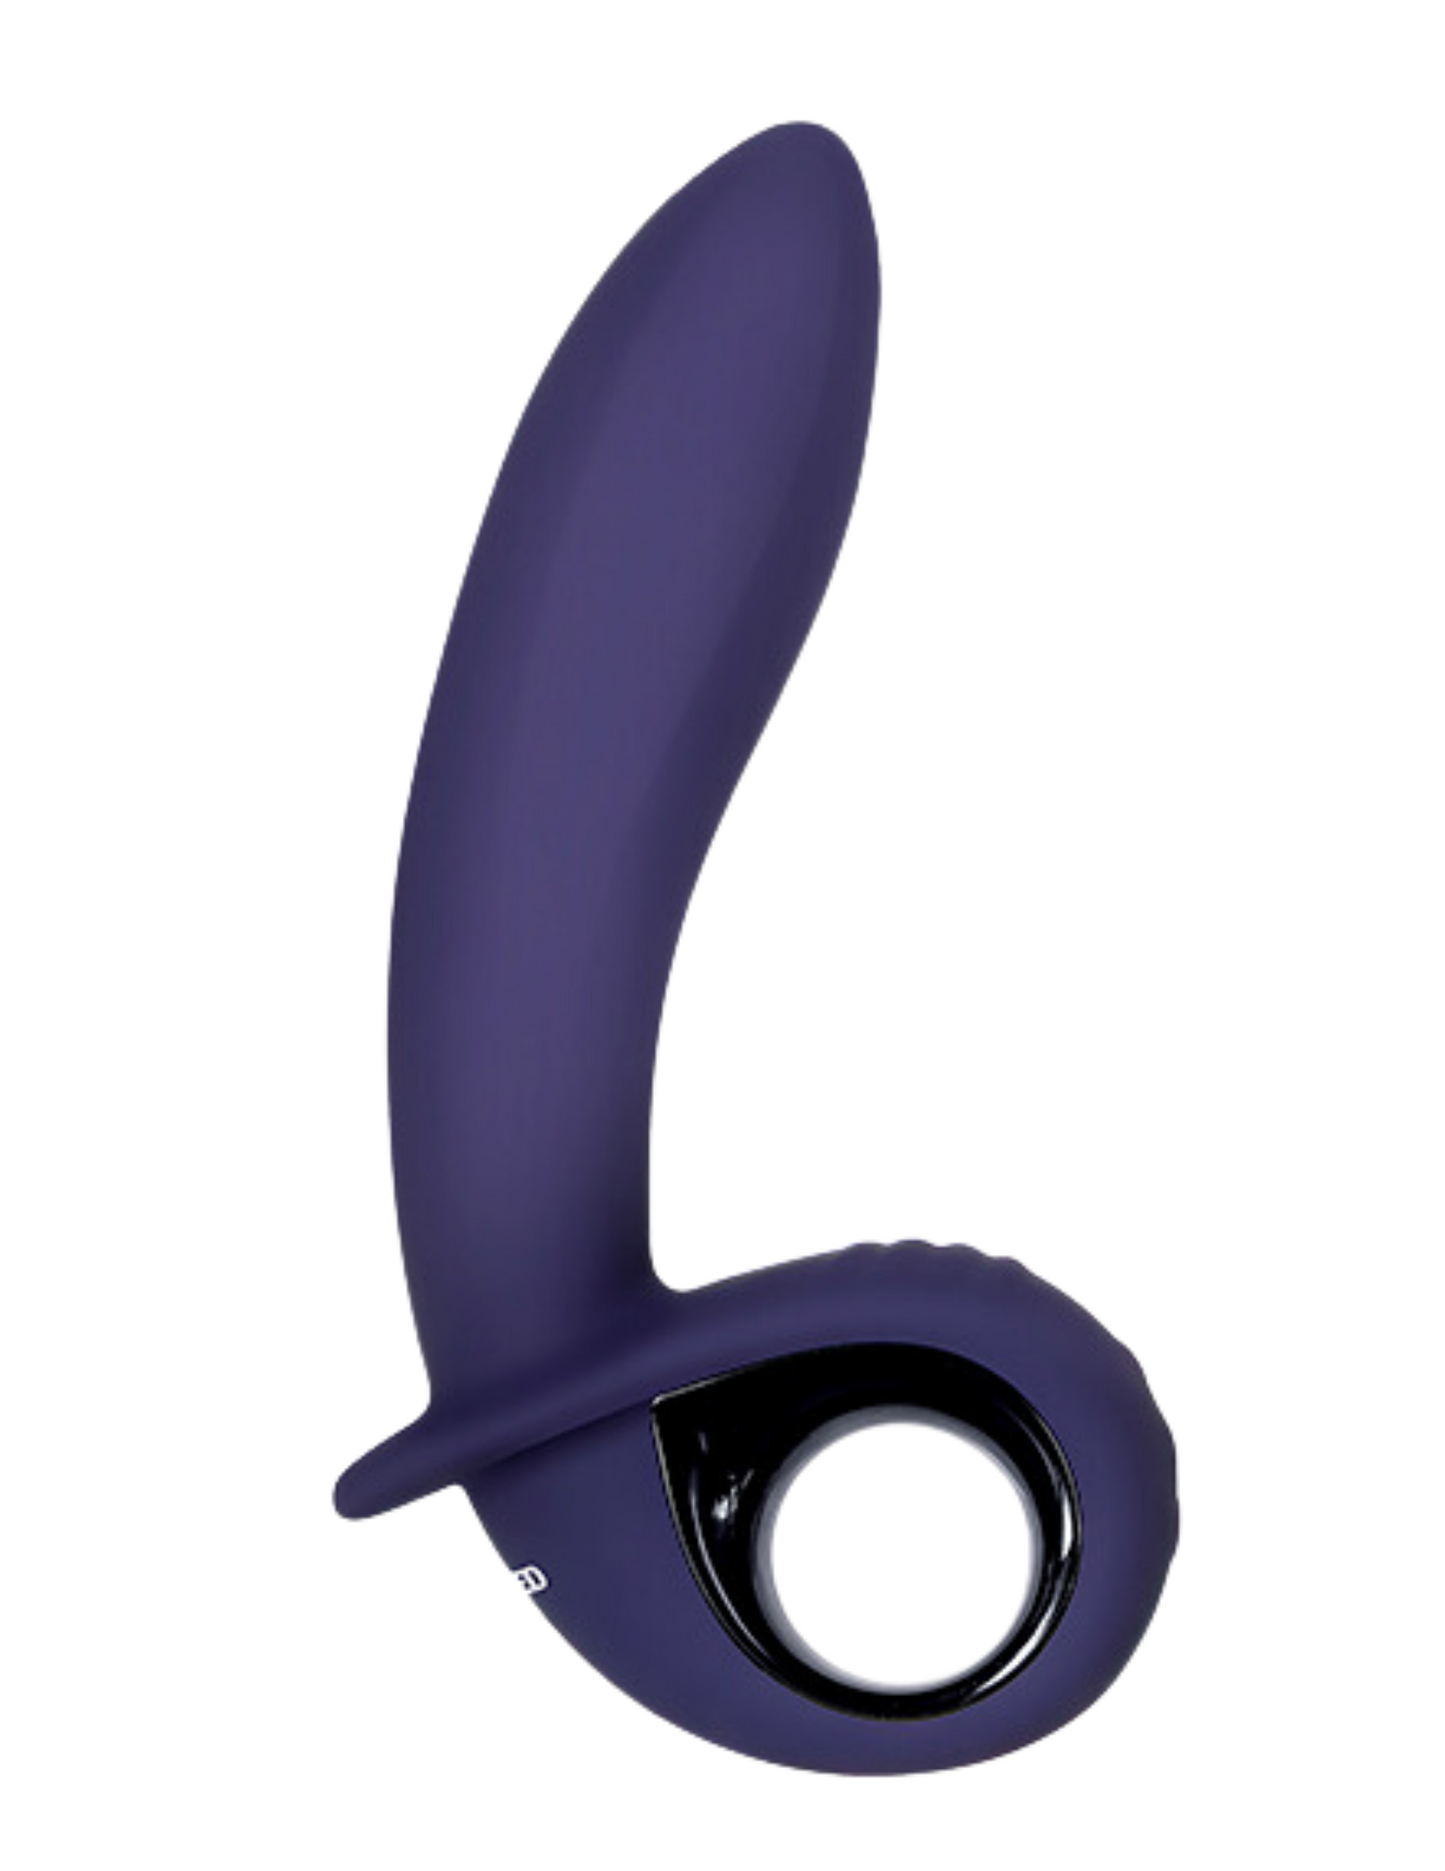 Photo shows a side view of the Inflatable G from Evolved Novelties (deflated) to show the difference in size of the top portion.